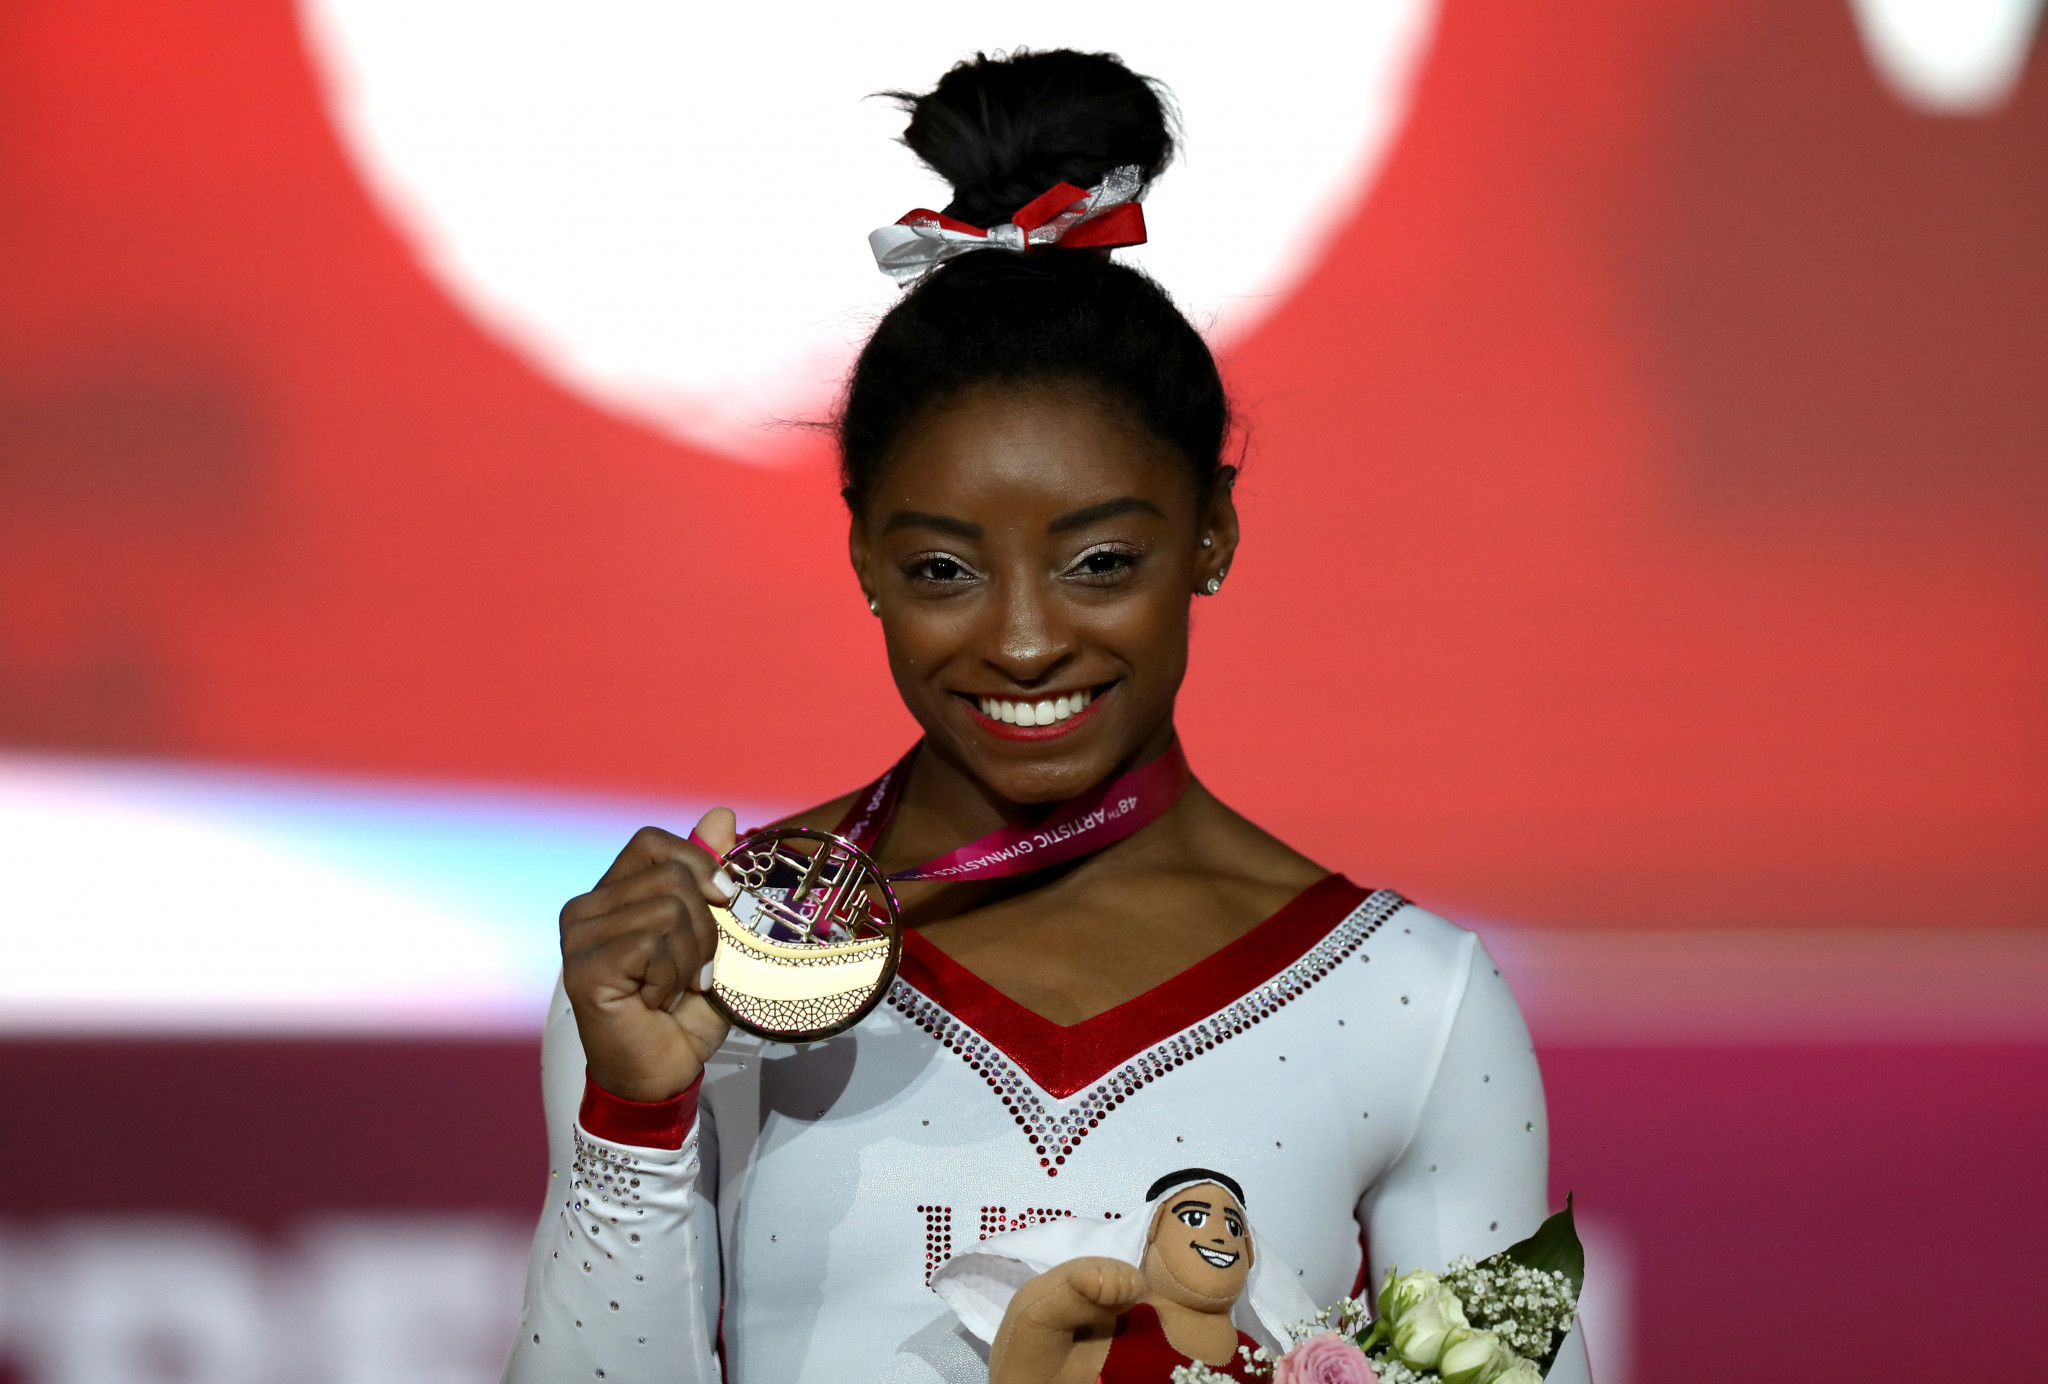 Biles wins record 13th gold medal with vault success at the Artistic Gymnastics World Championships